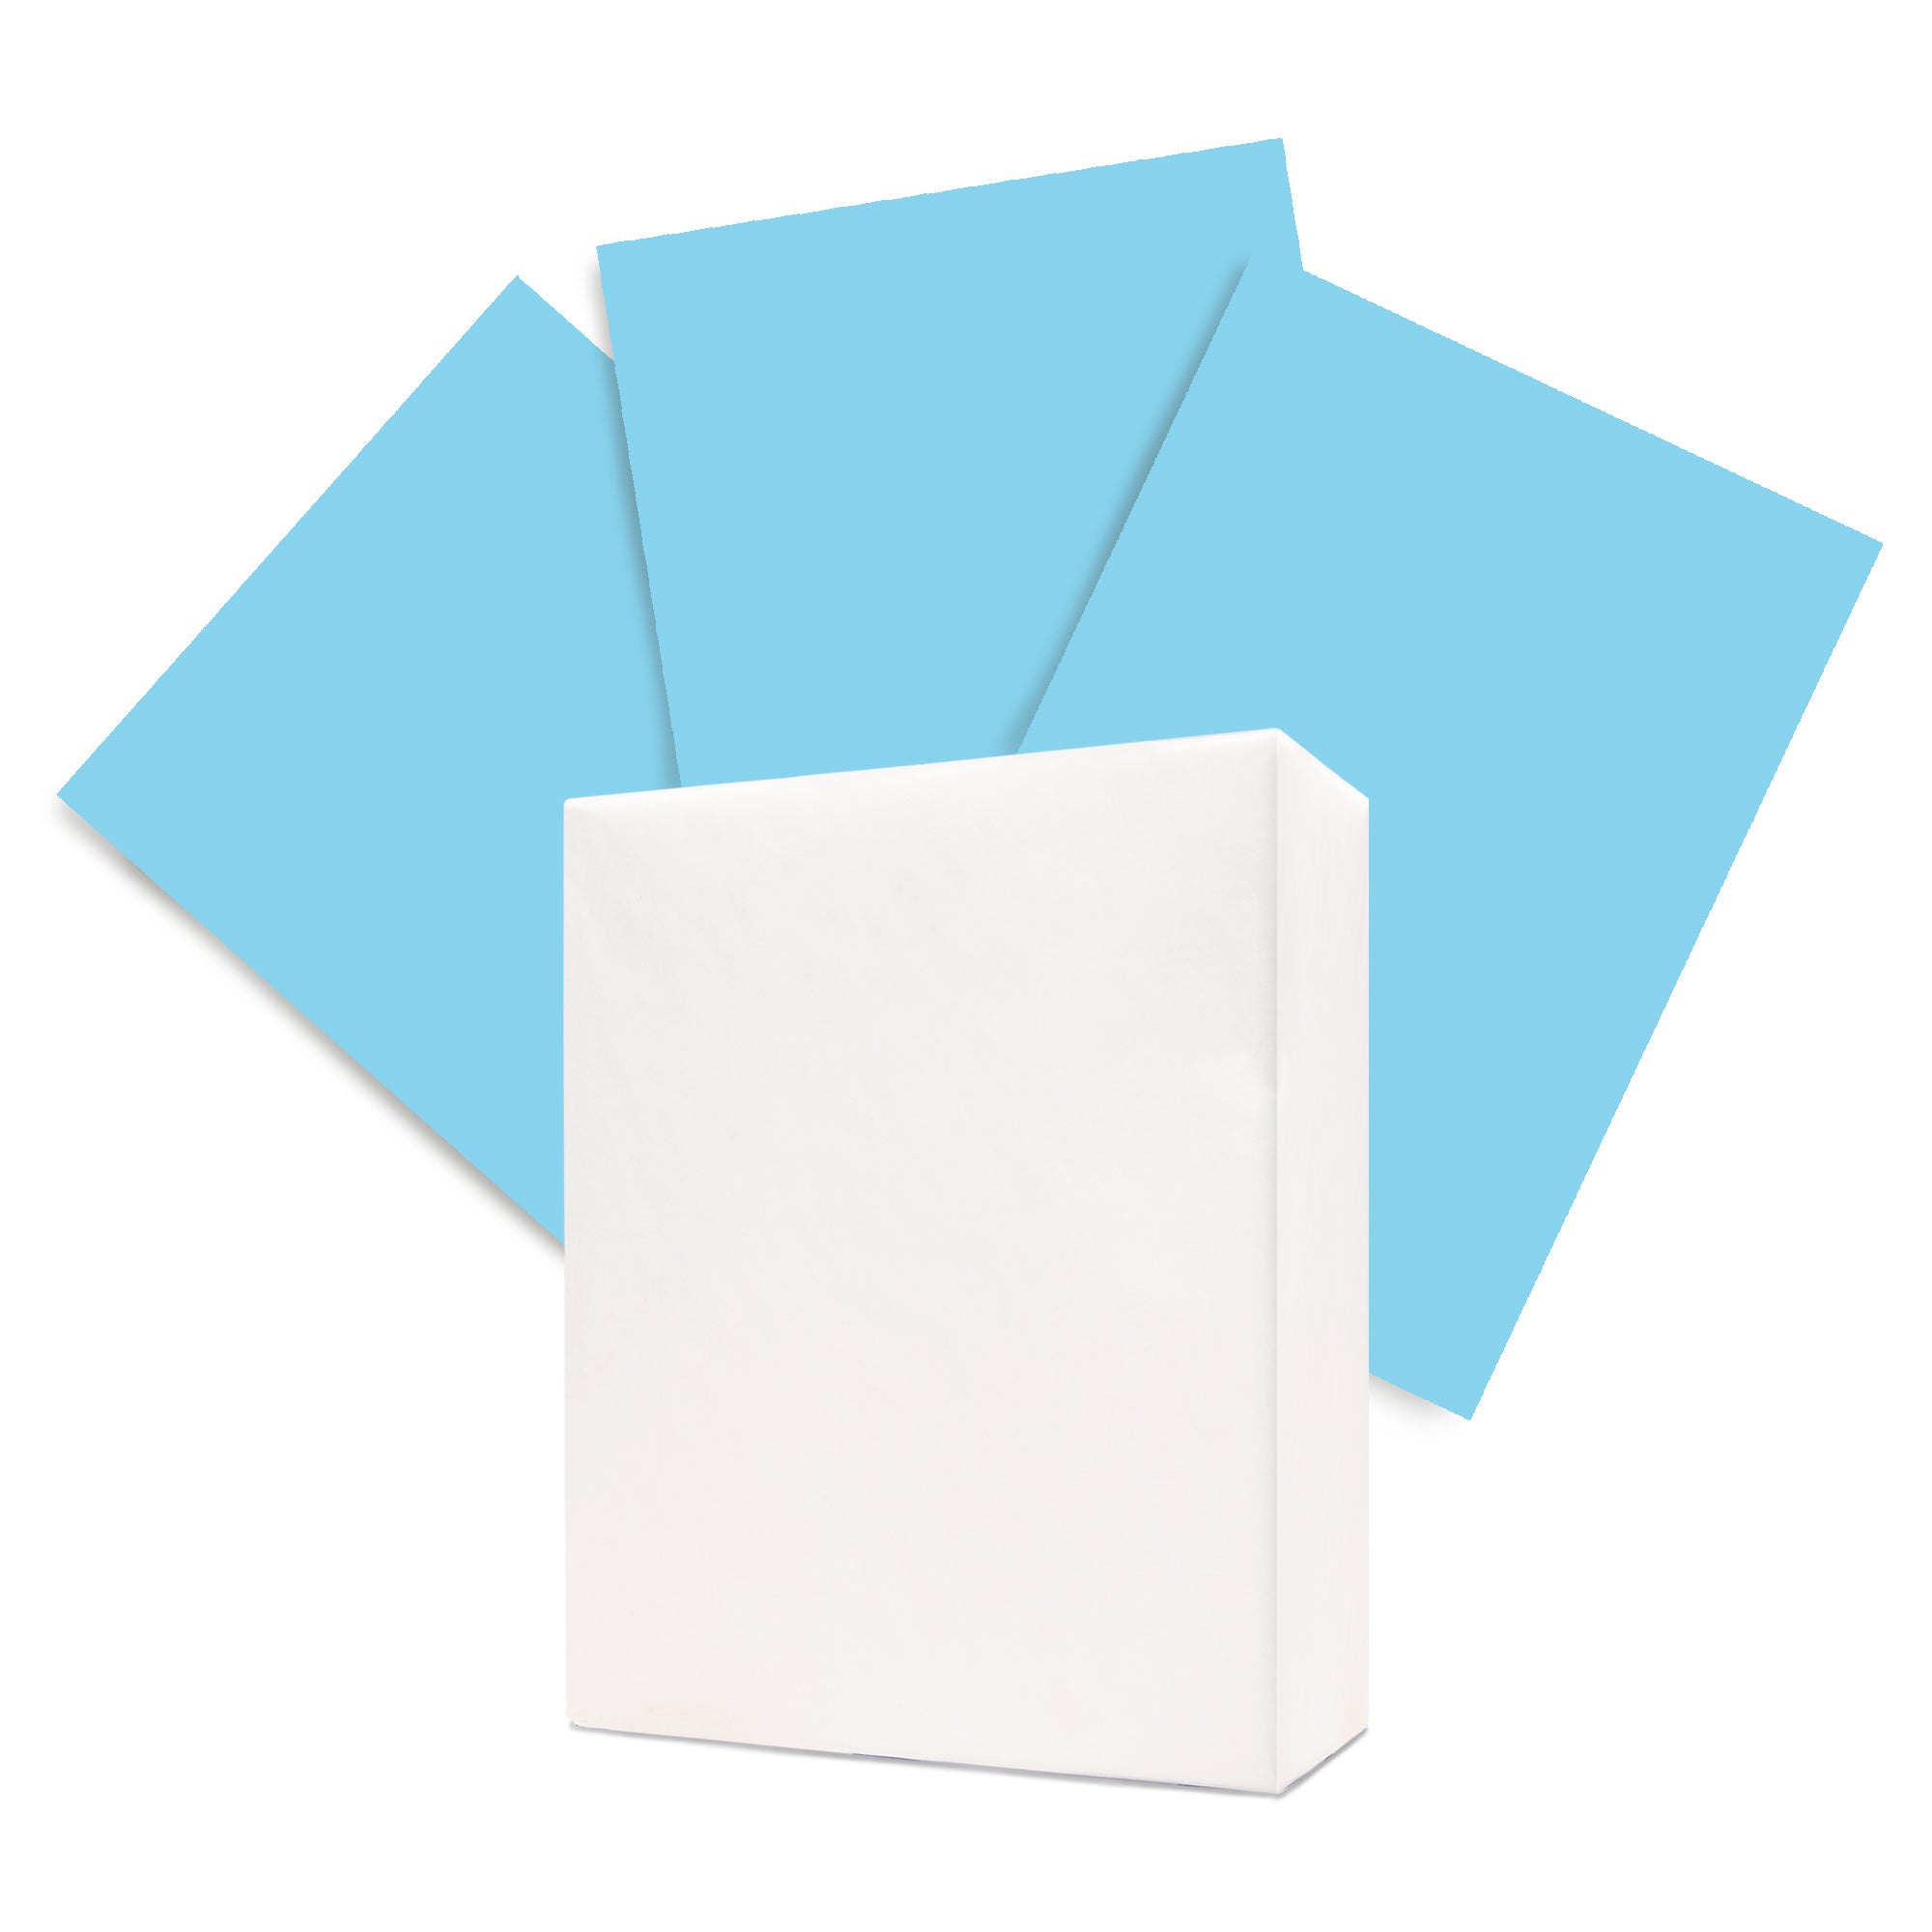 Blank Paper/Ream (500 sheets)